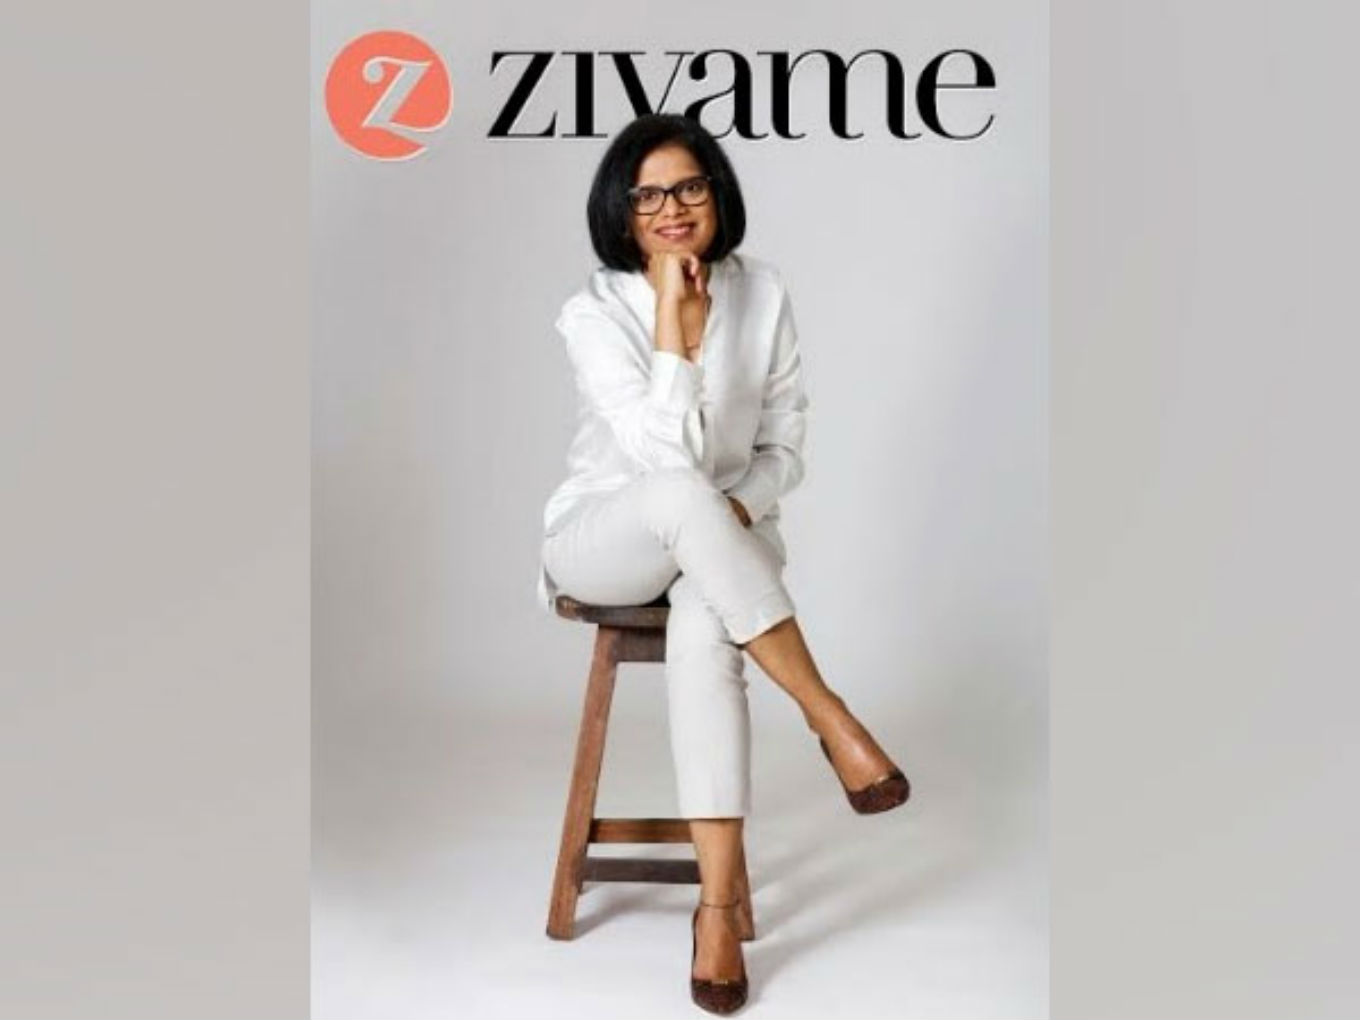 Zivame's strategy to be the perfect fit for India's lingerie